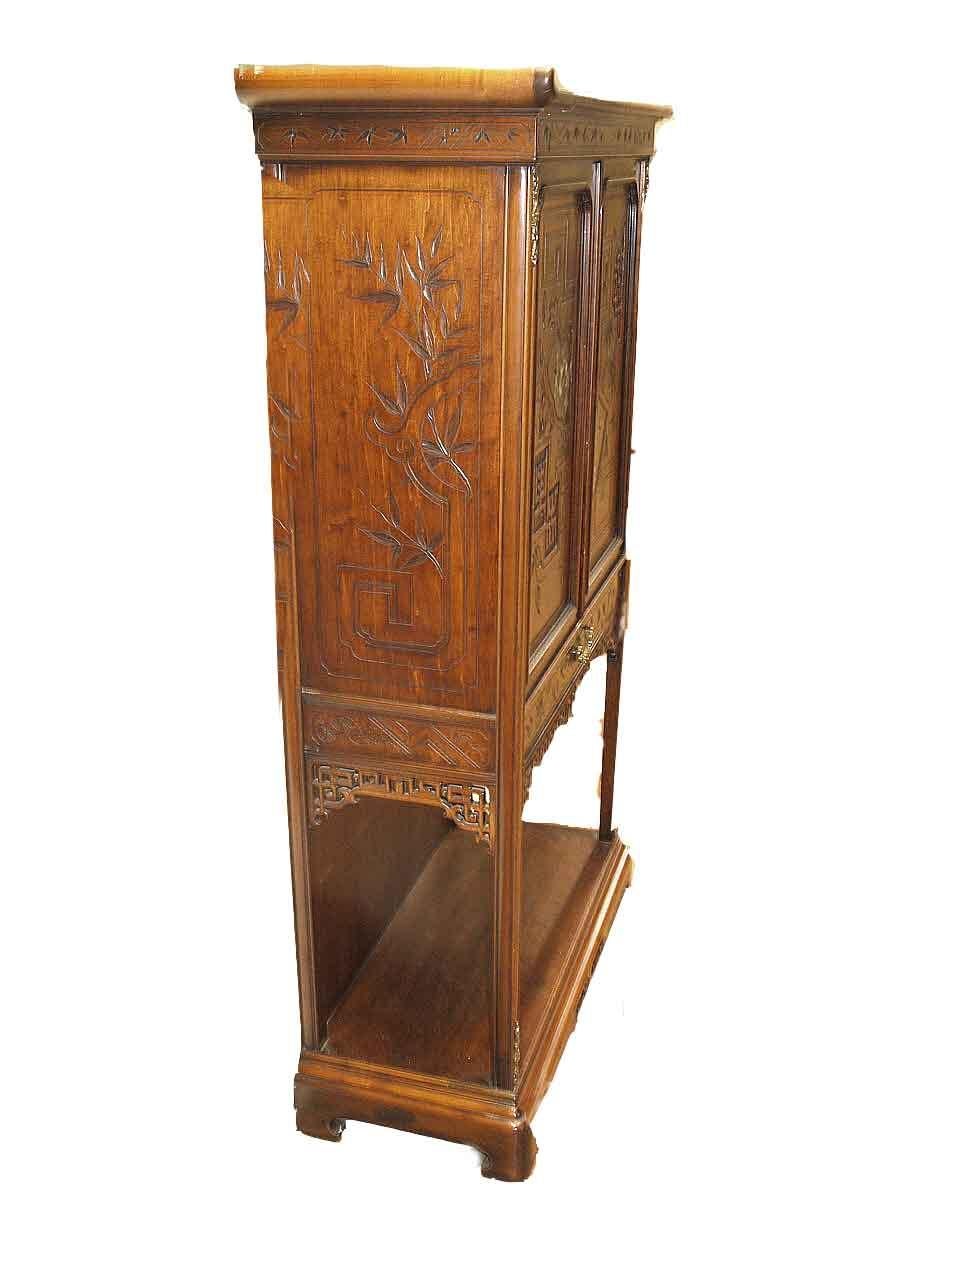 Carved Japanese inlaid cabinet, the cornice with ''turned up'' ends above foliate carved frieze, sides with carved leaves and arabesques, double doors with similar carving in addition to carved Japanese symbols and cartouches with mother of pearl